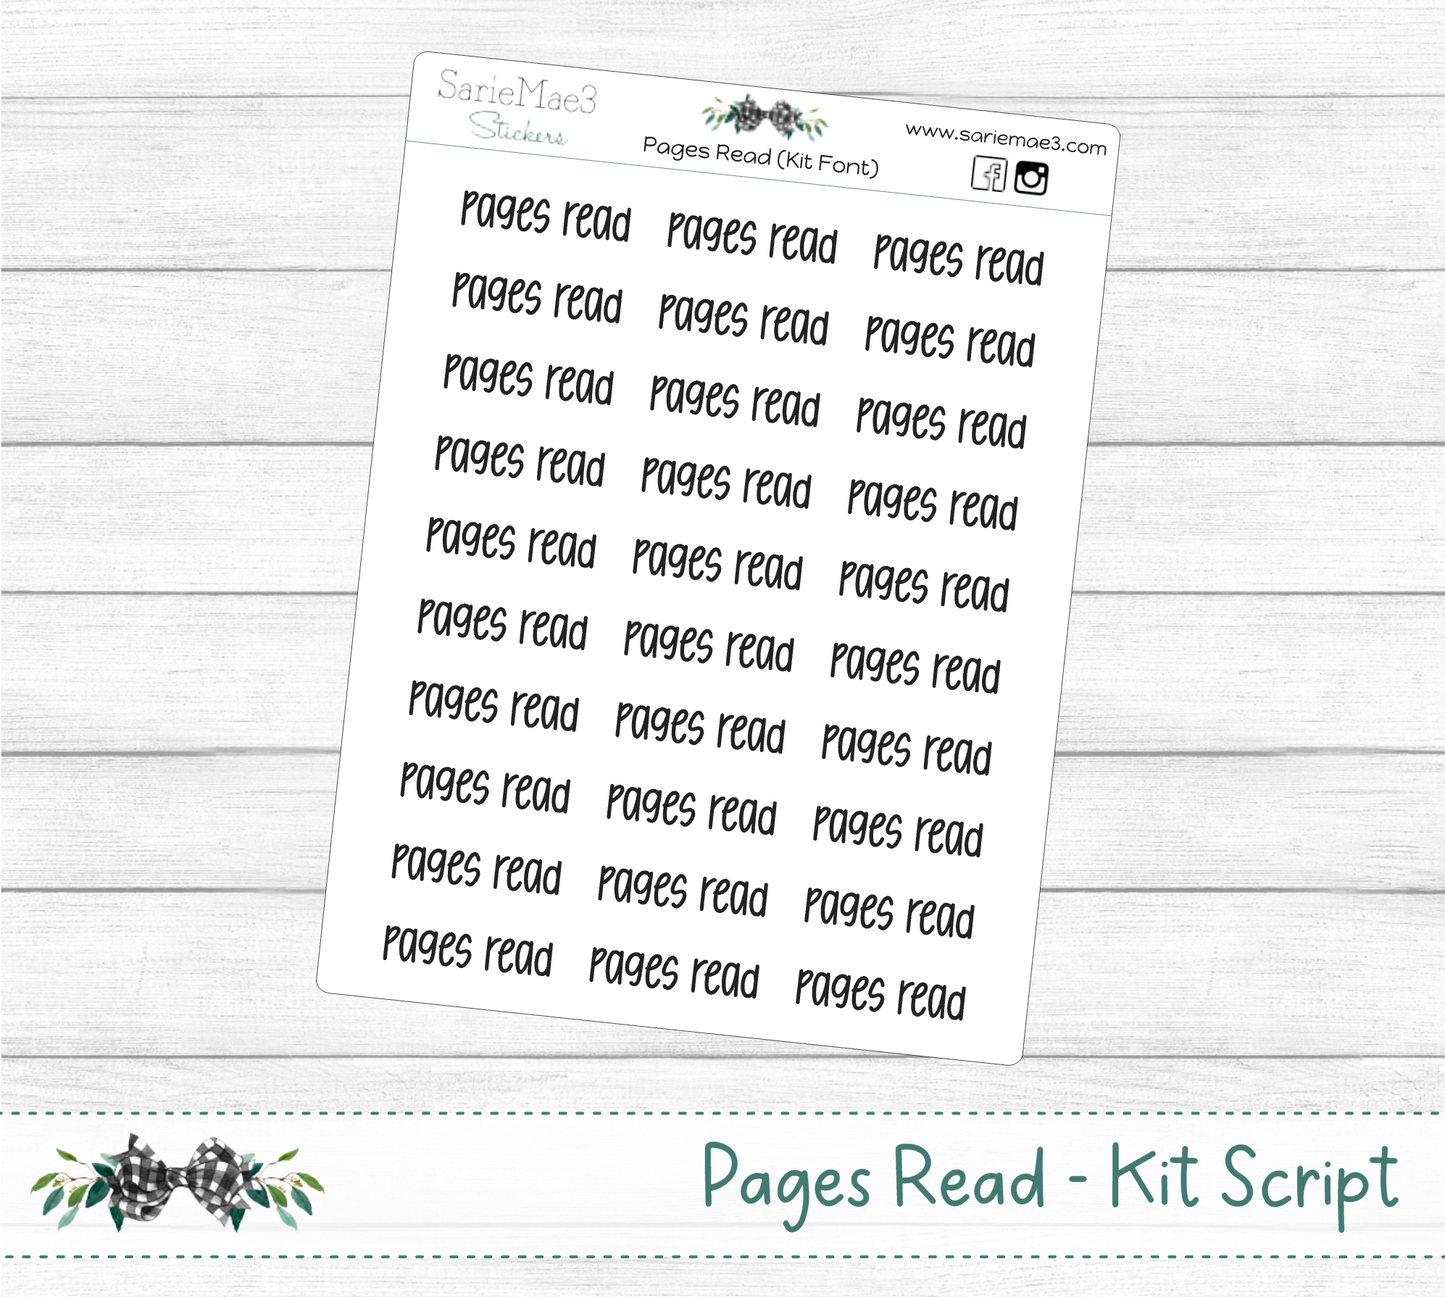 Pages Read (Kit Font)